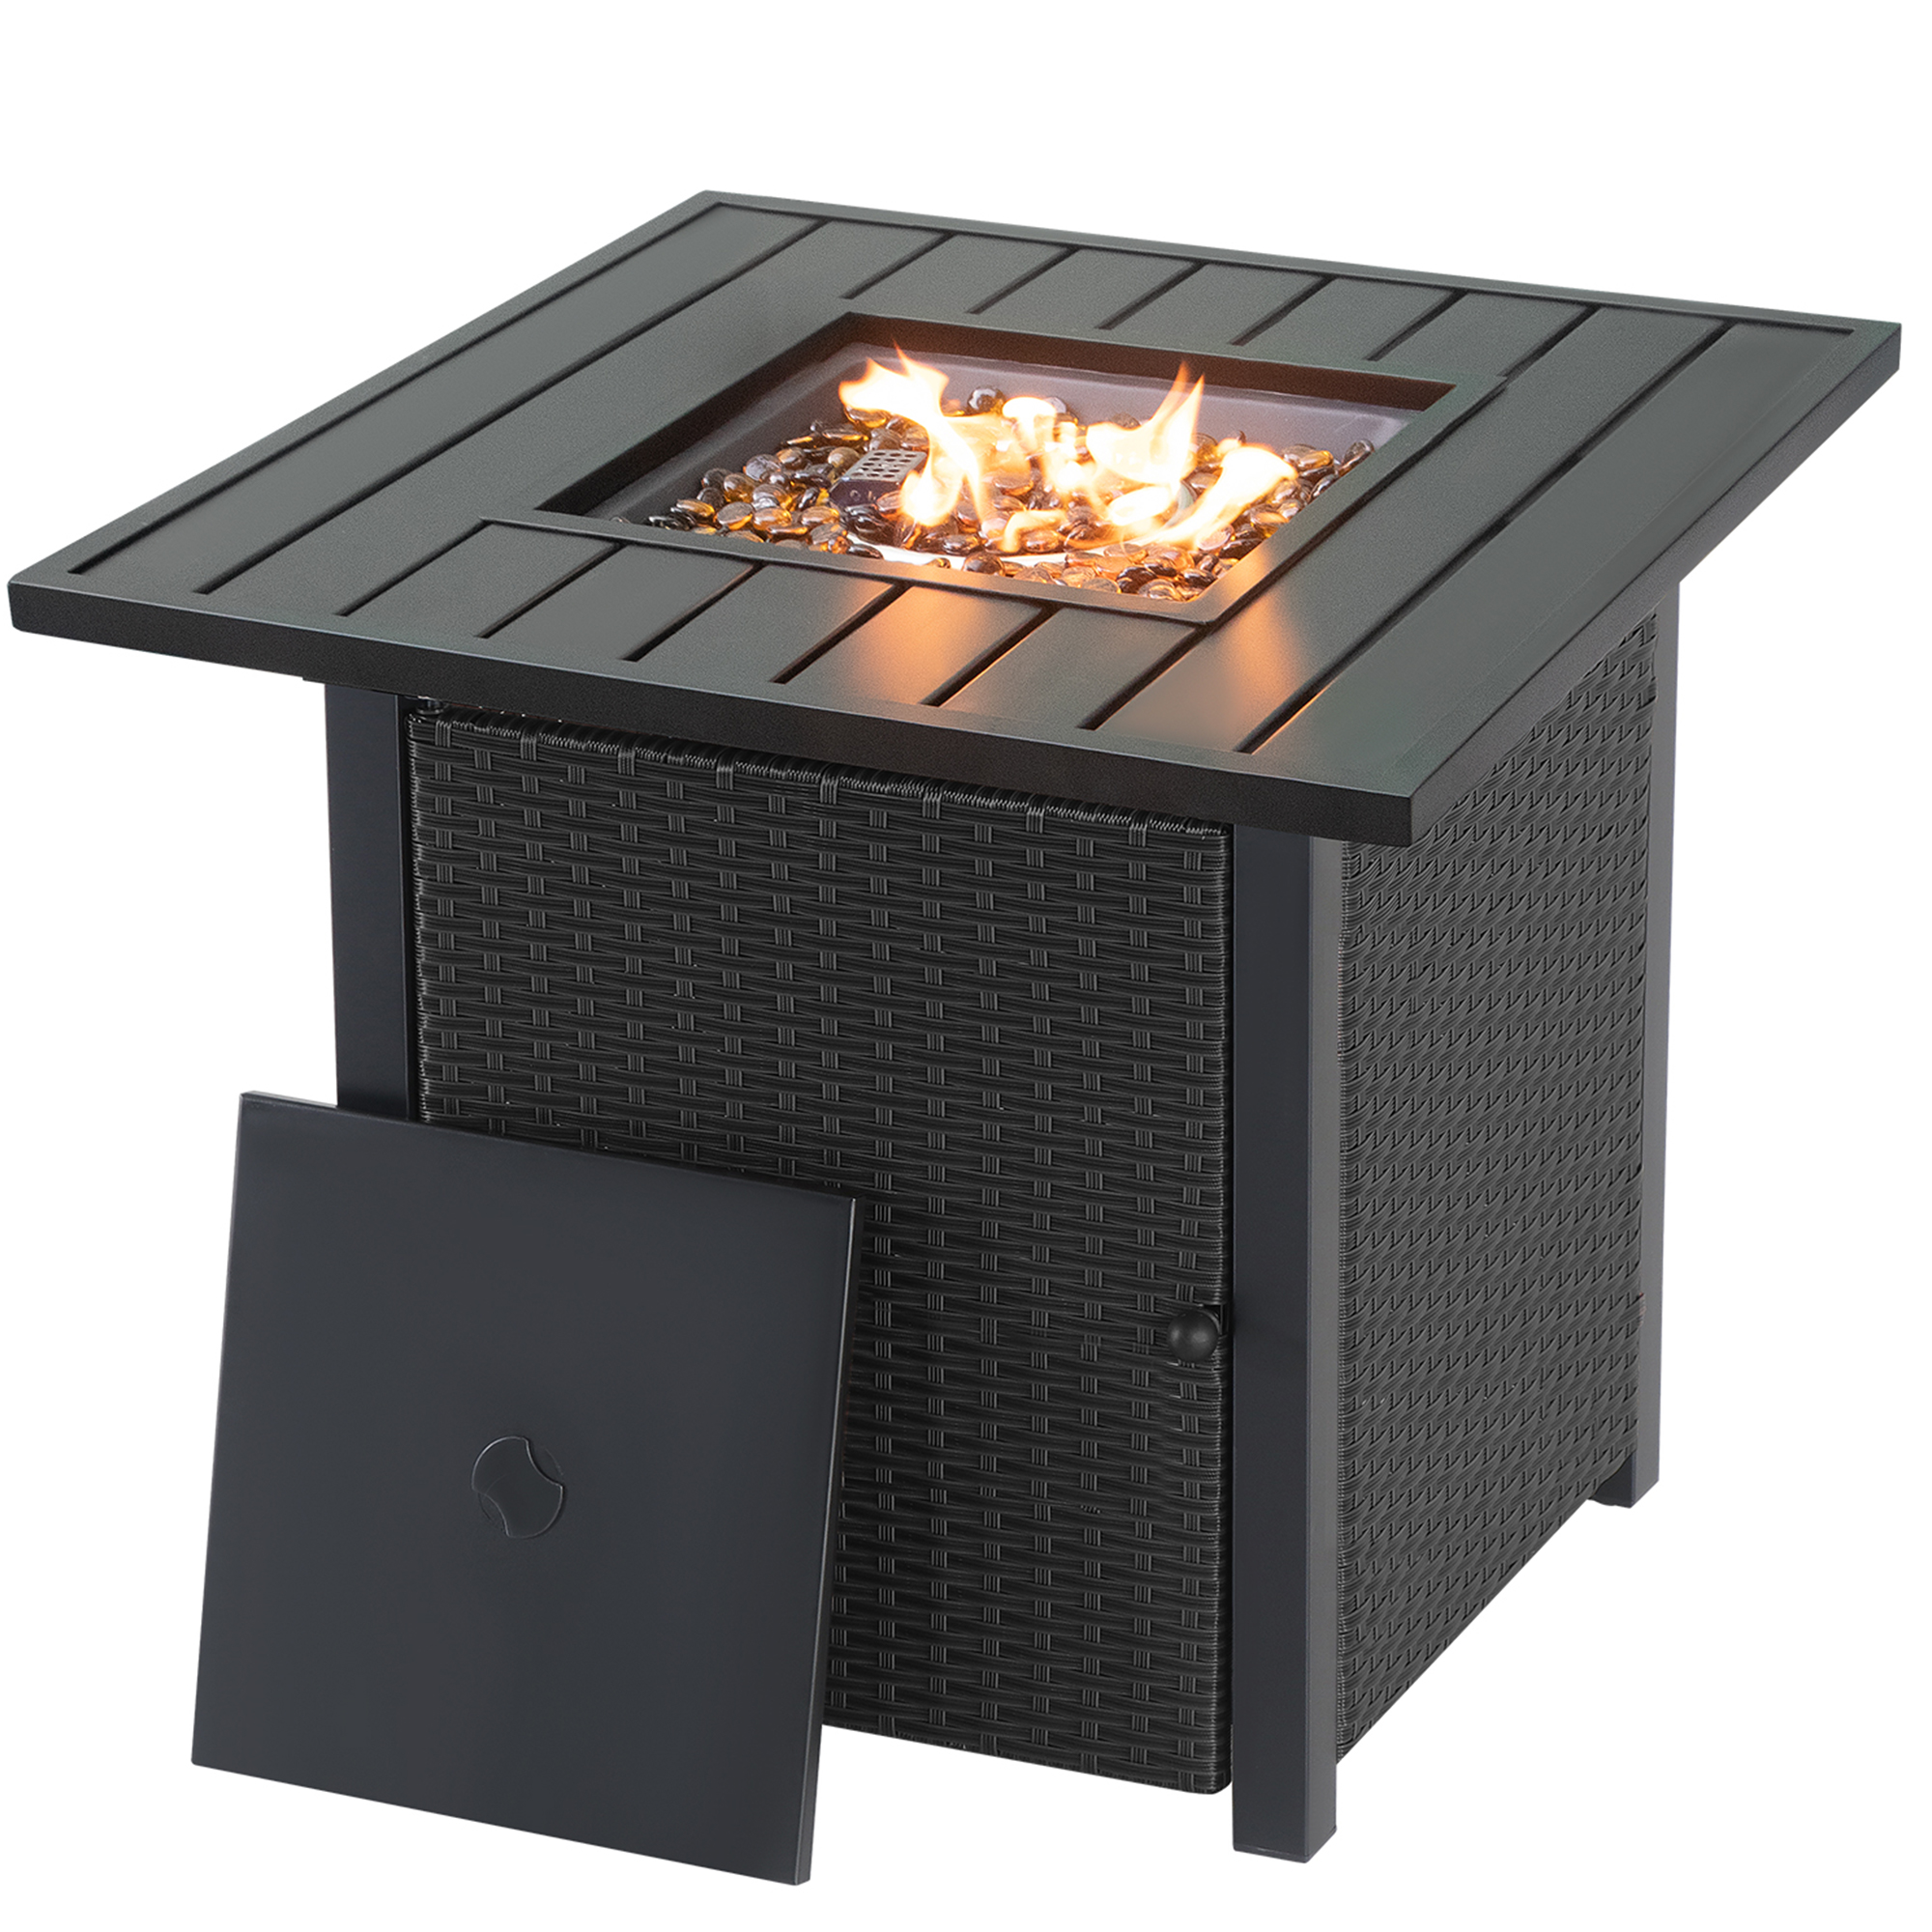 Propane Fire Pit Table Wicker 28in 40,000 BTU, Patio Outdoor LP Rattan Gas FirePit Steel Tabletop with Lid and Fire Glass Beads CSA Certified, Black-Boyel Living